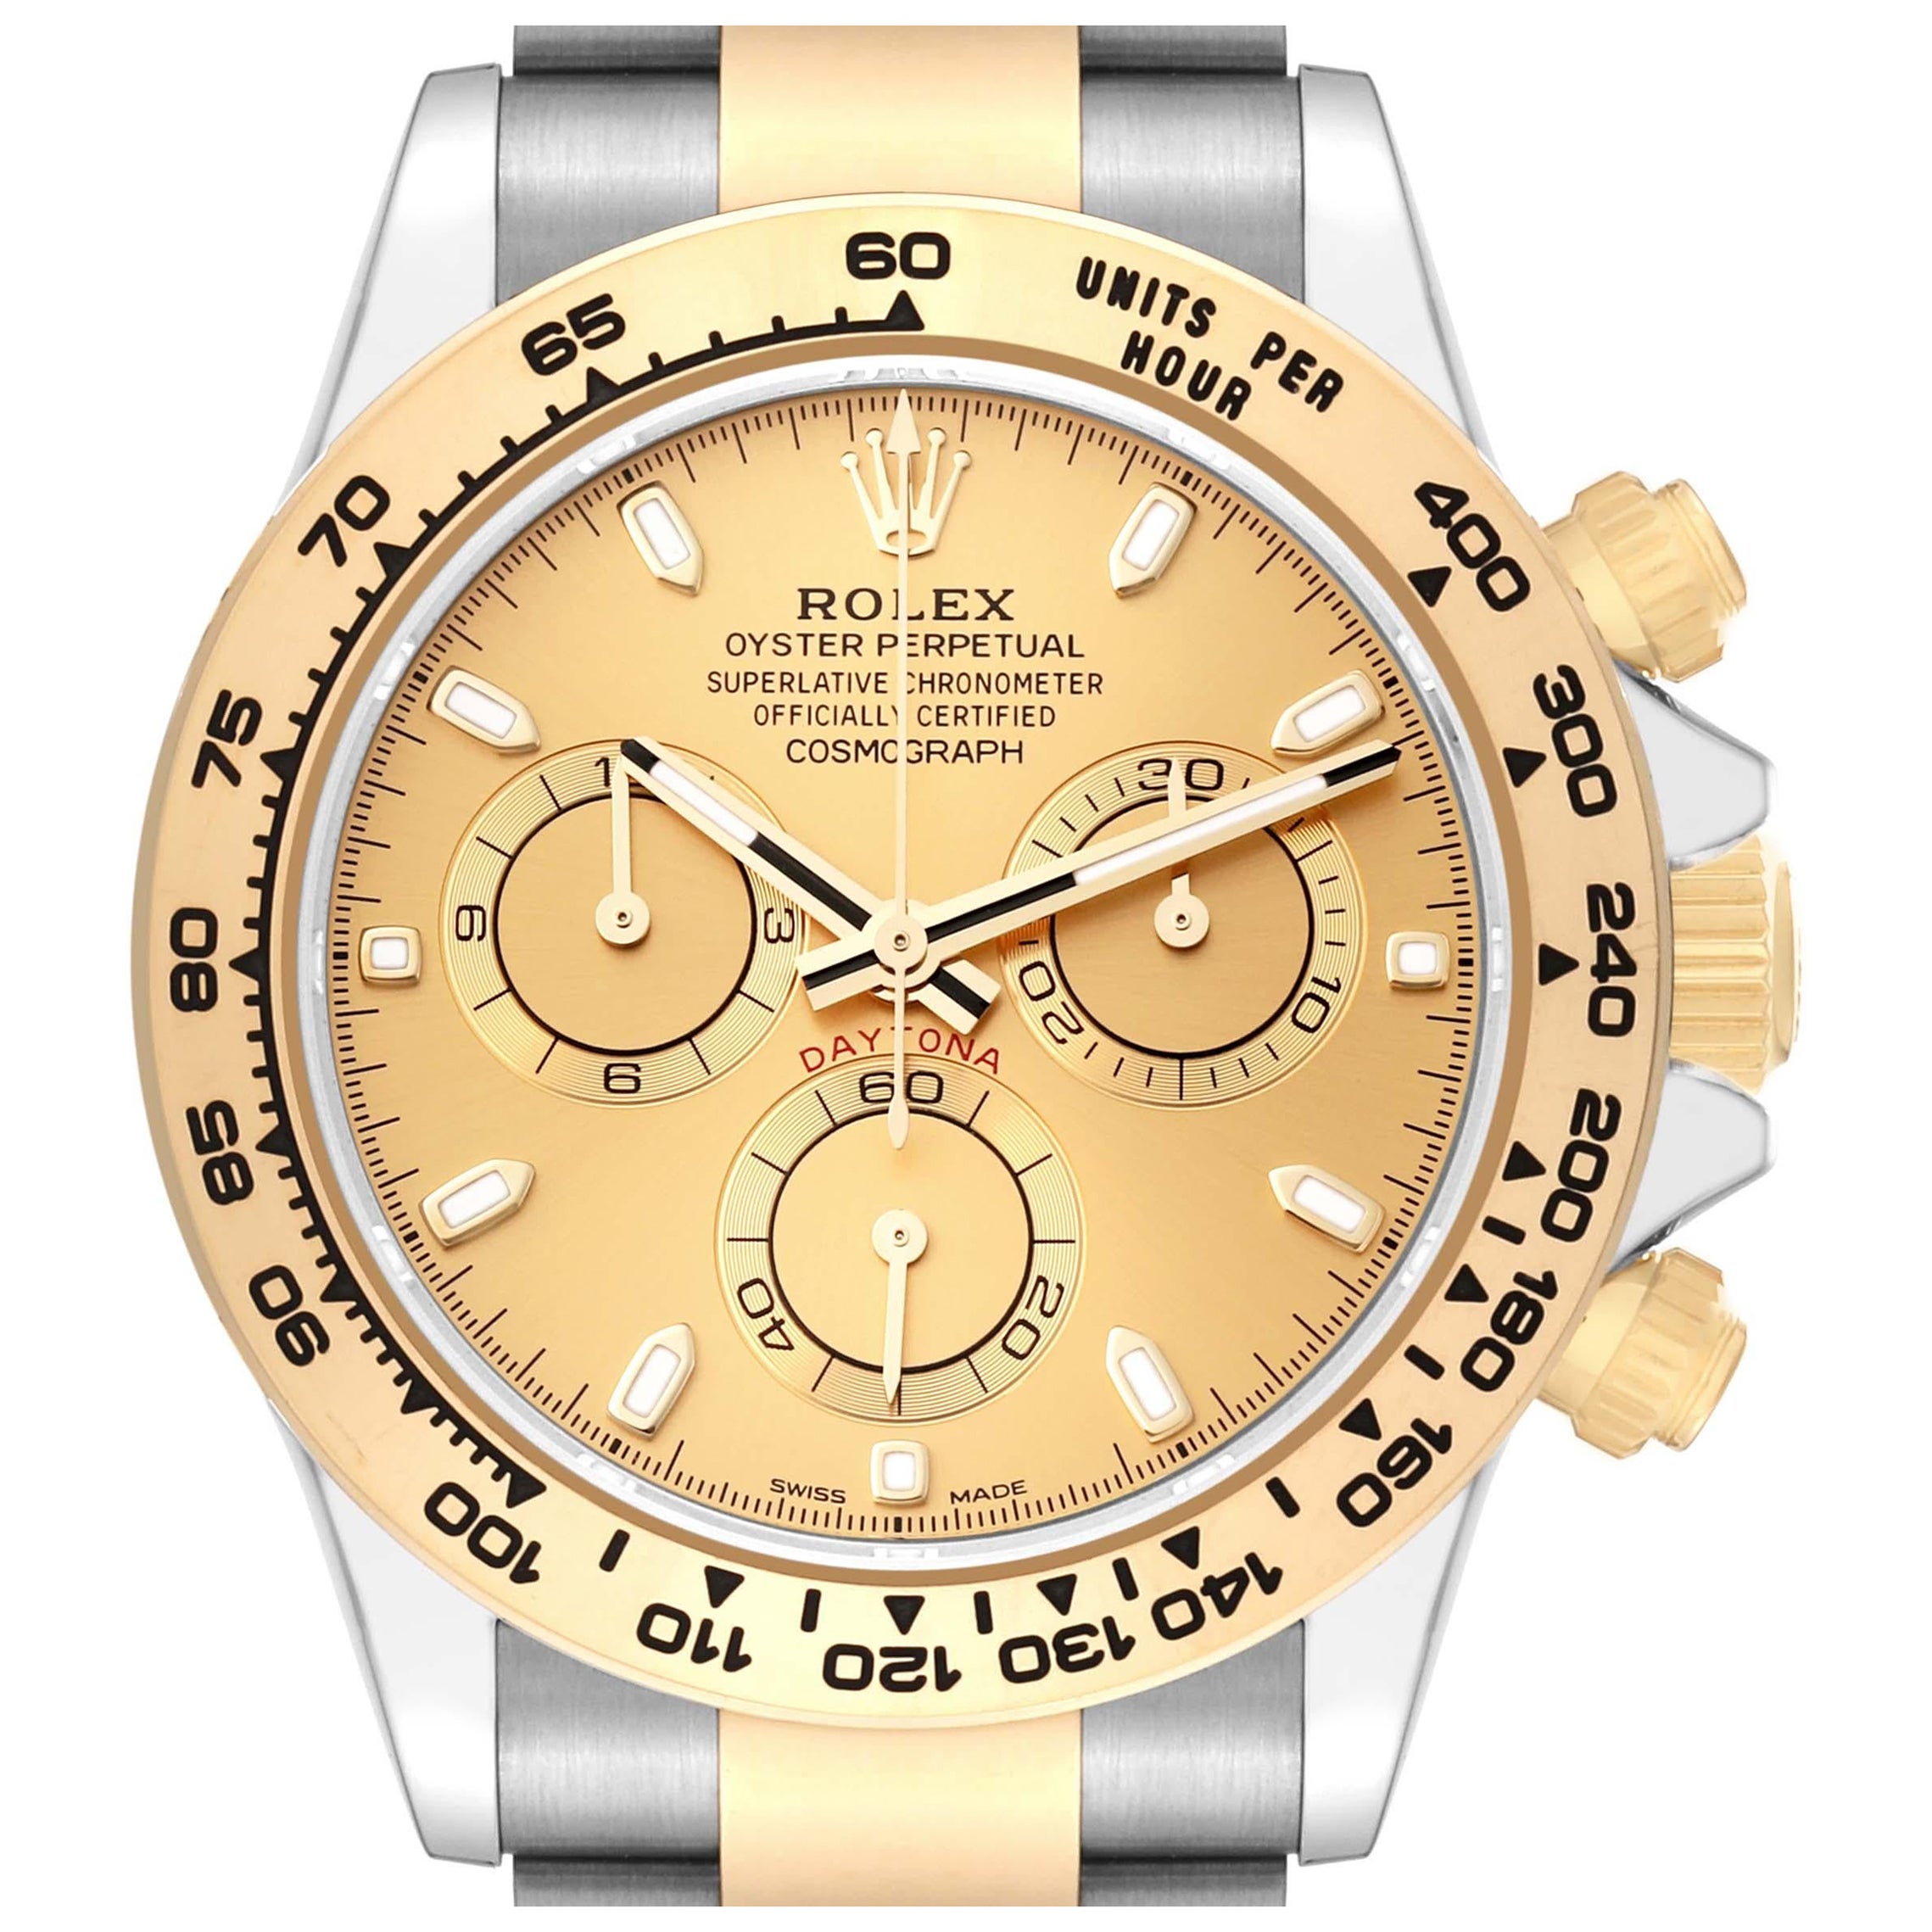 Rolex Daytona Champagne Dial Steel Yellow Gold Mens Watch 116503 Box Card For Sale